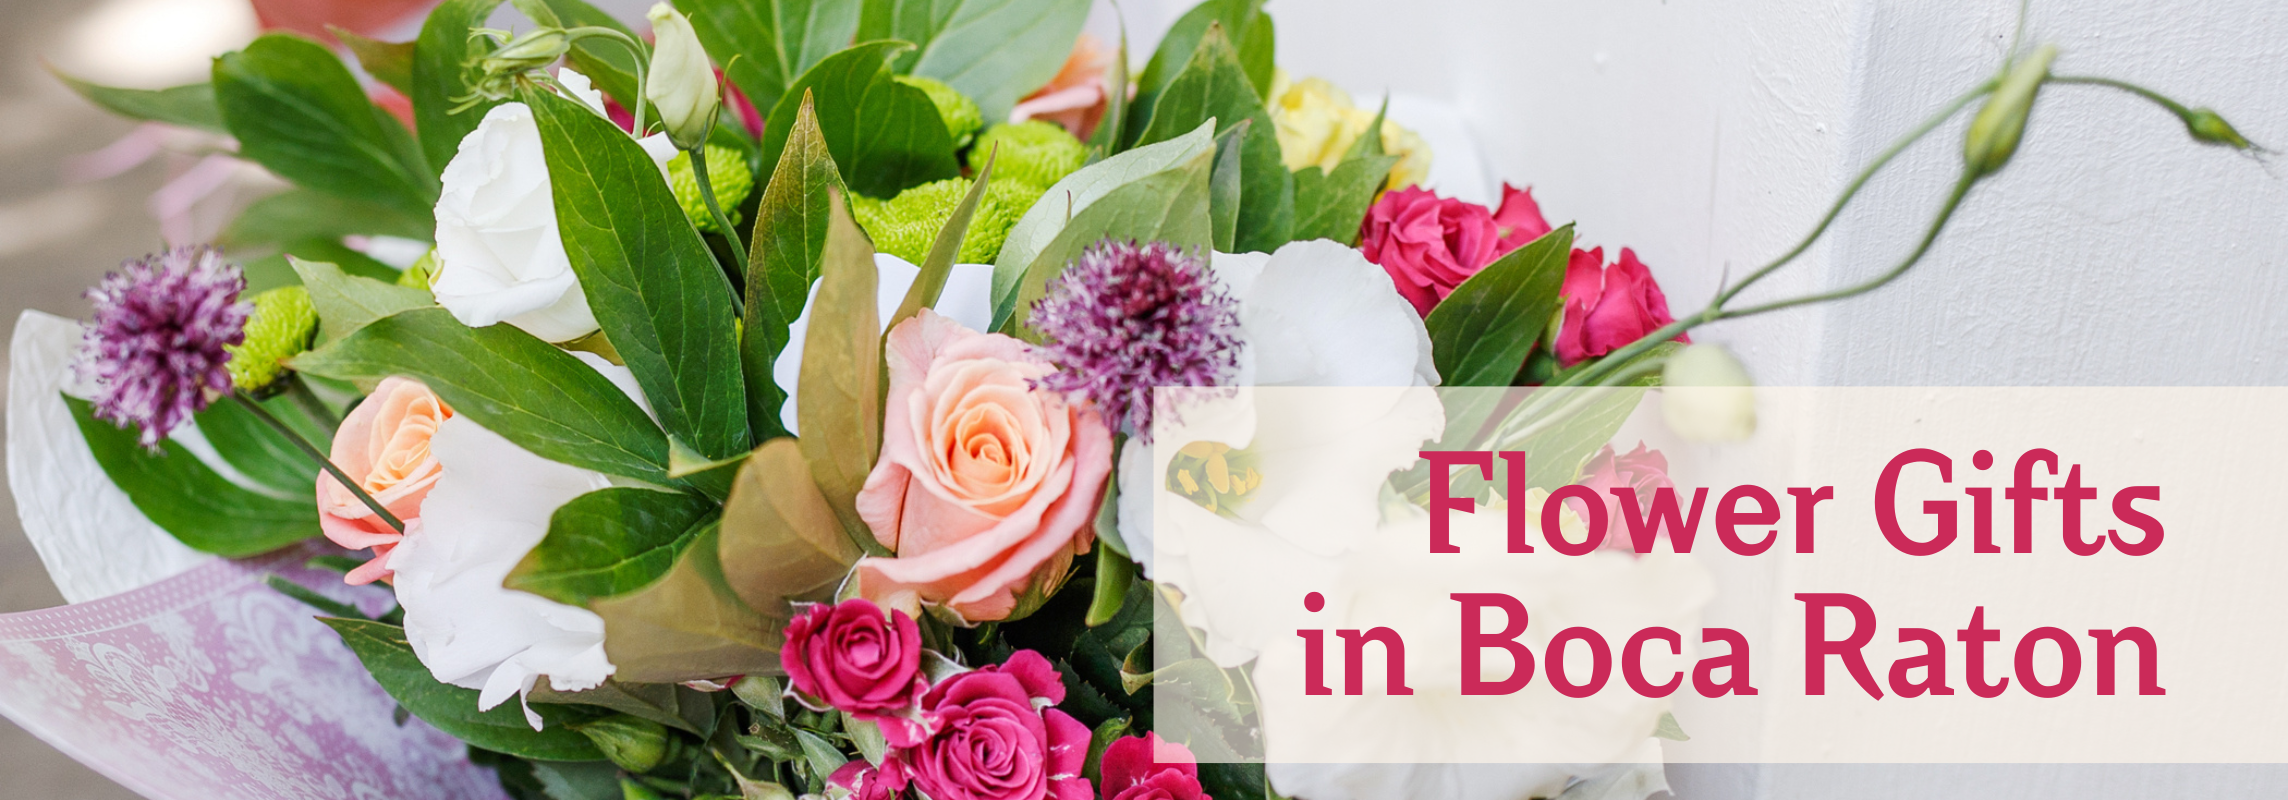 flower gifts in Boca Raton